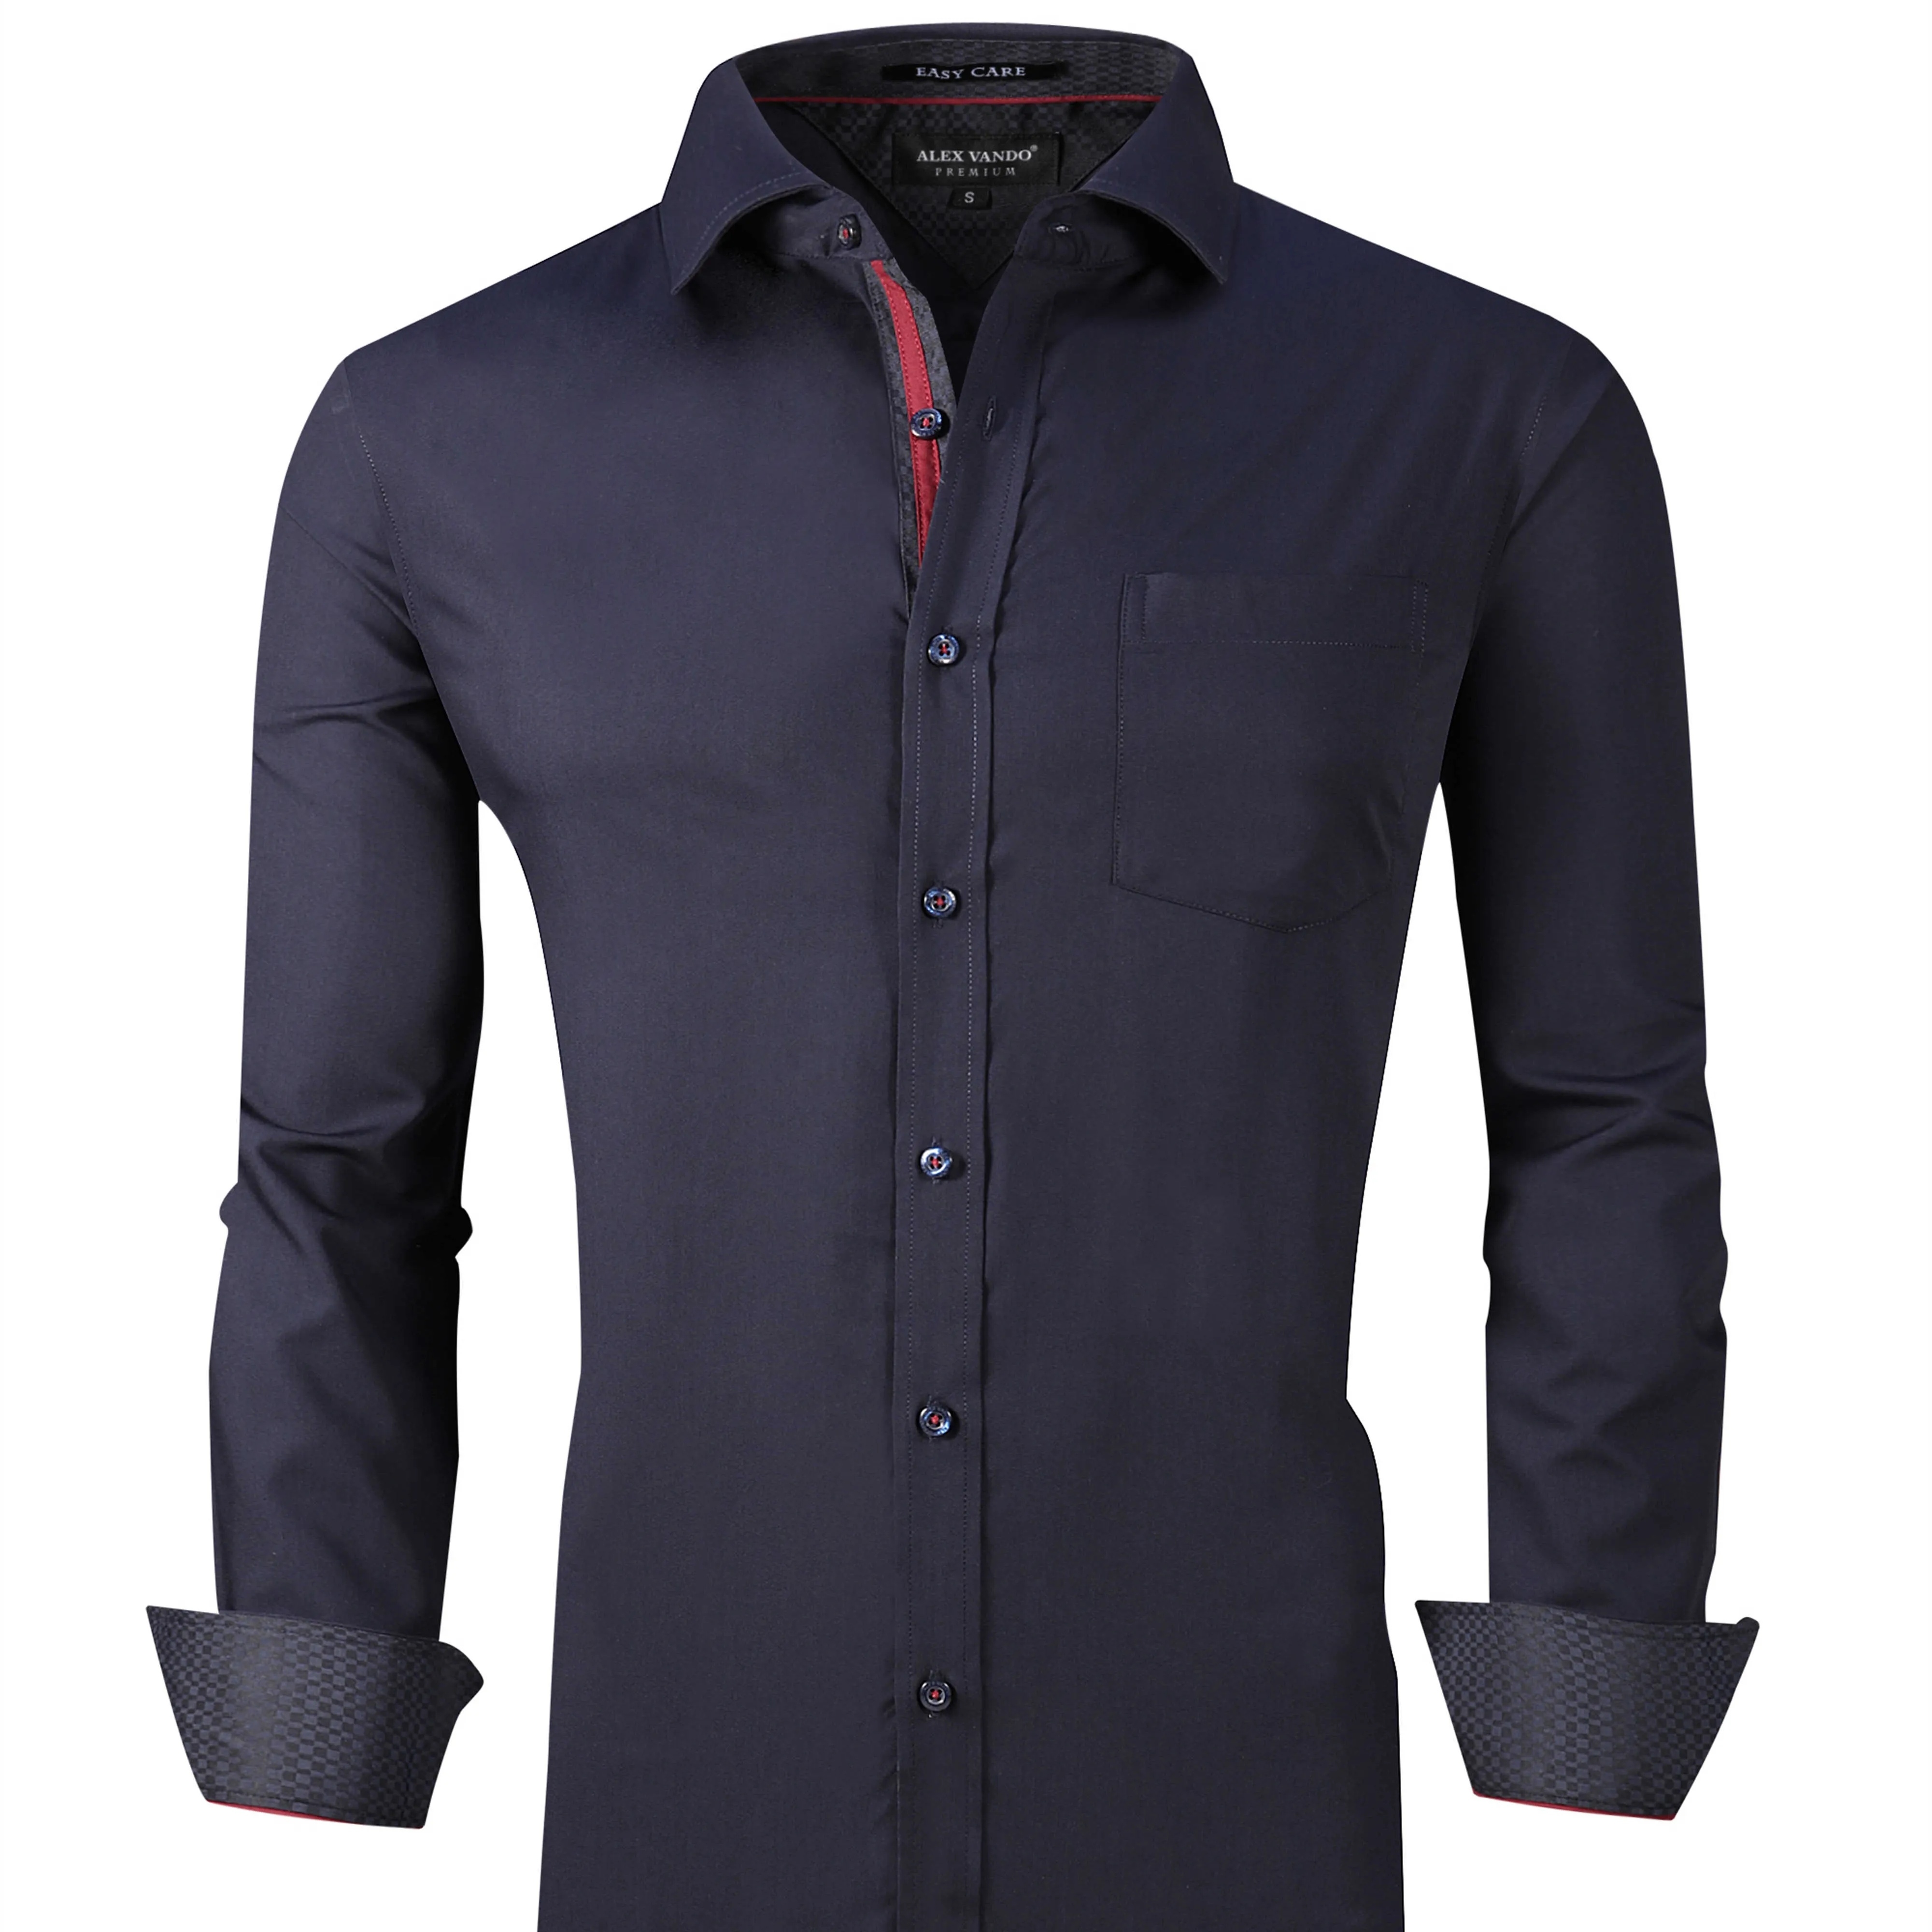 Custom long sleeves solid color plain men's business formal dress shirt OEM casual shirts High quality plus size